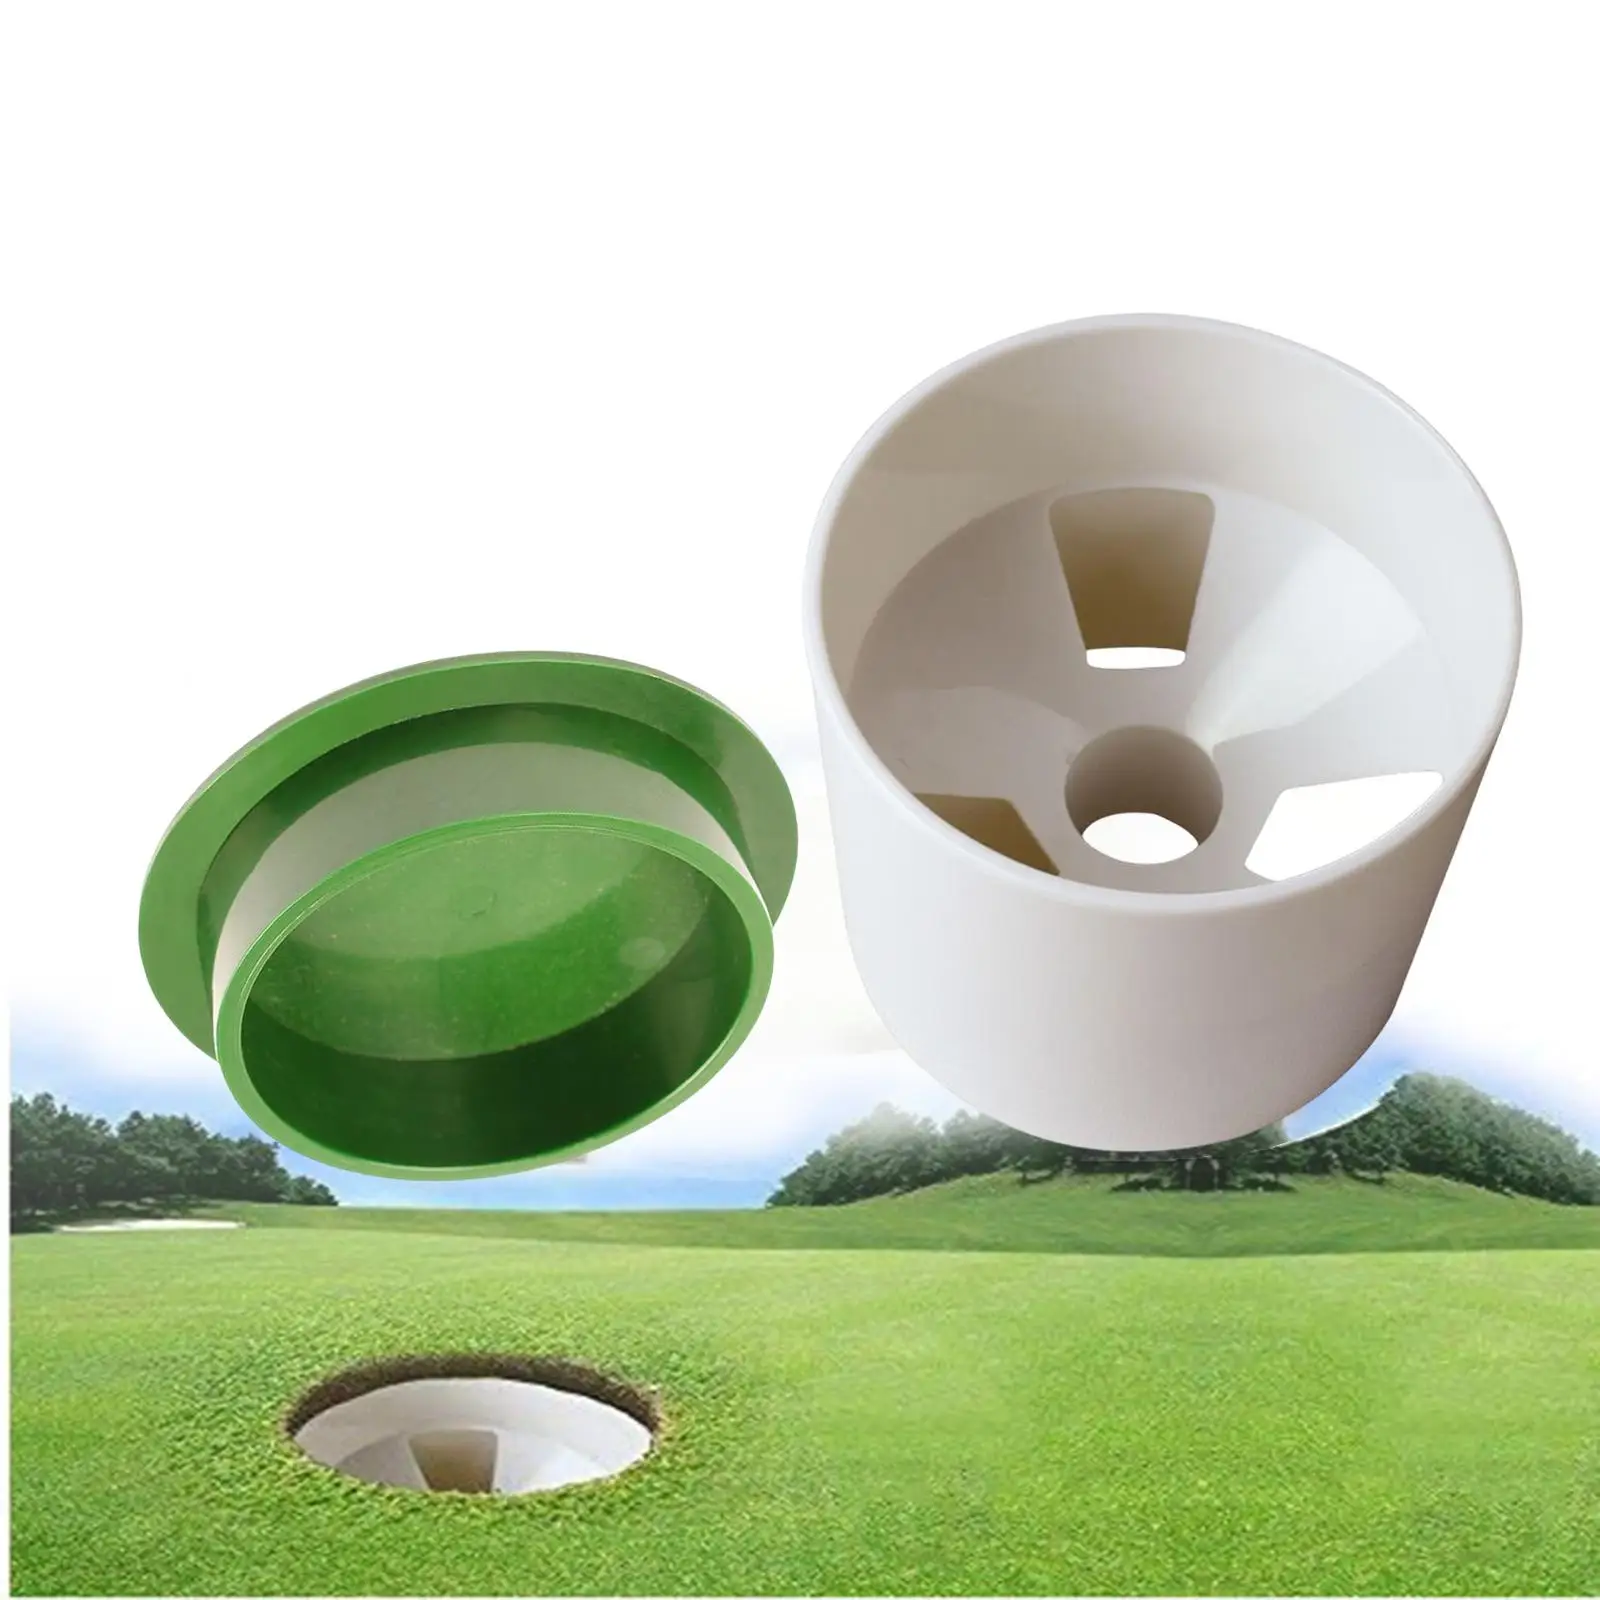 Golf hole cups for Putter Trainer Practice Hitting Training Indoor Outdoor